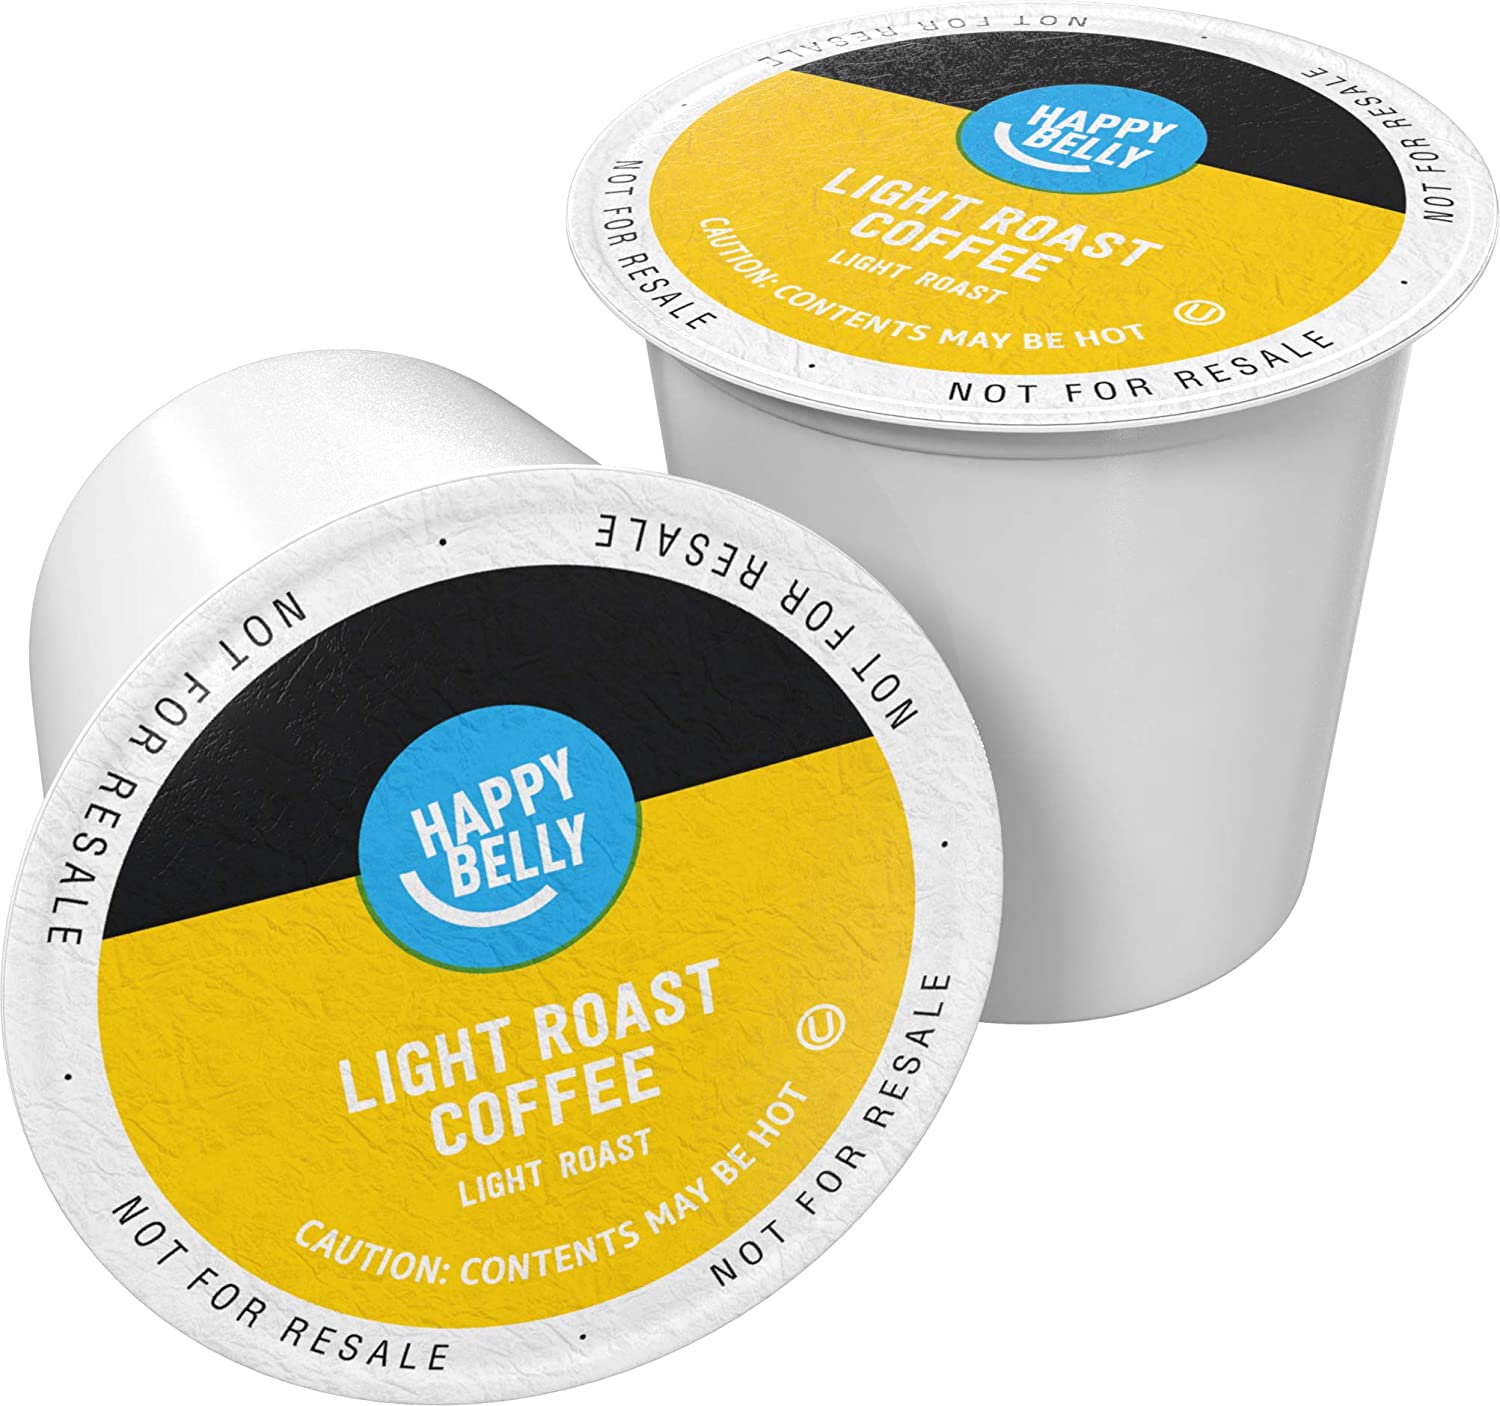 YMMV- Amazon Brand - 100 Ct. Happy Belly Light Roast Coffee Pods, Morning Light, Compatible with Keurig 2.0 K-Cup Brewers - $21.41